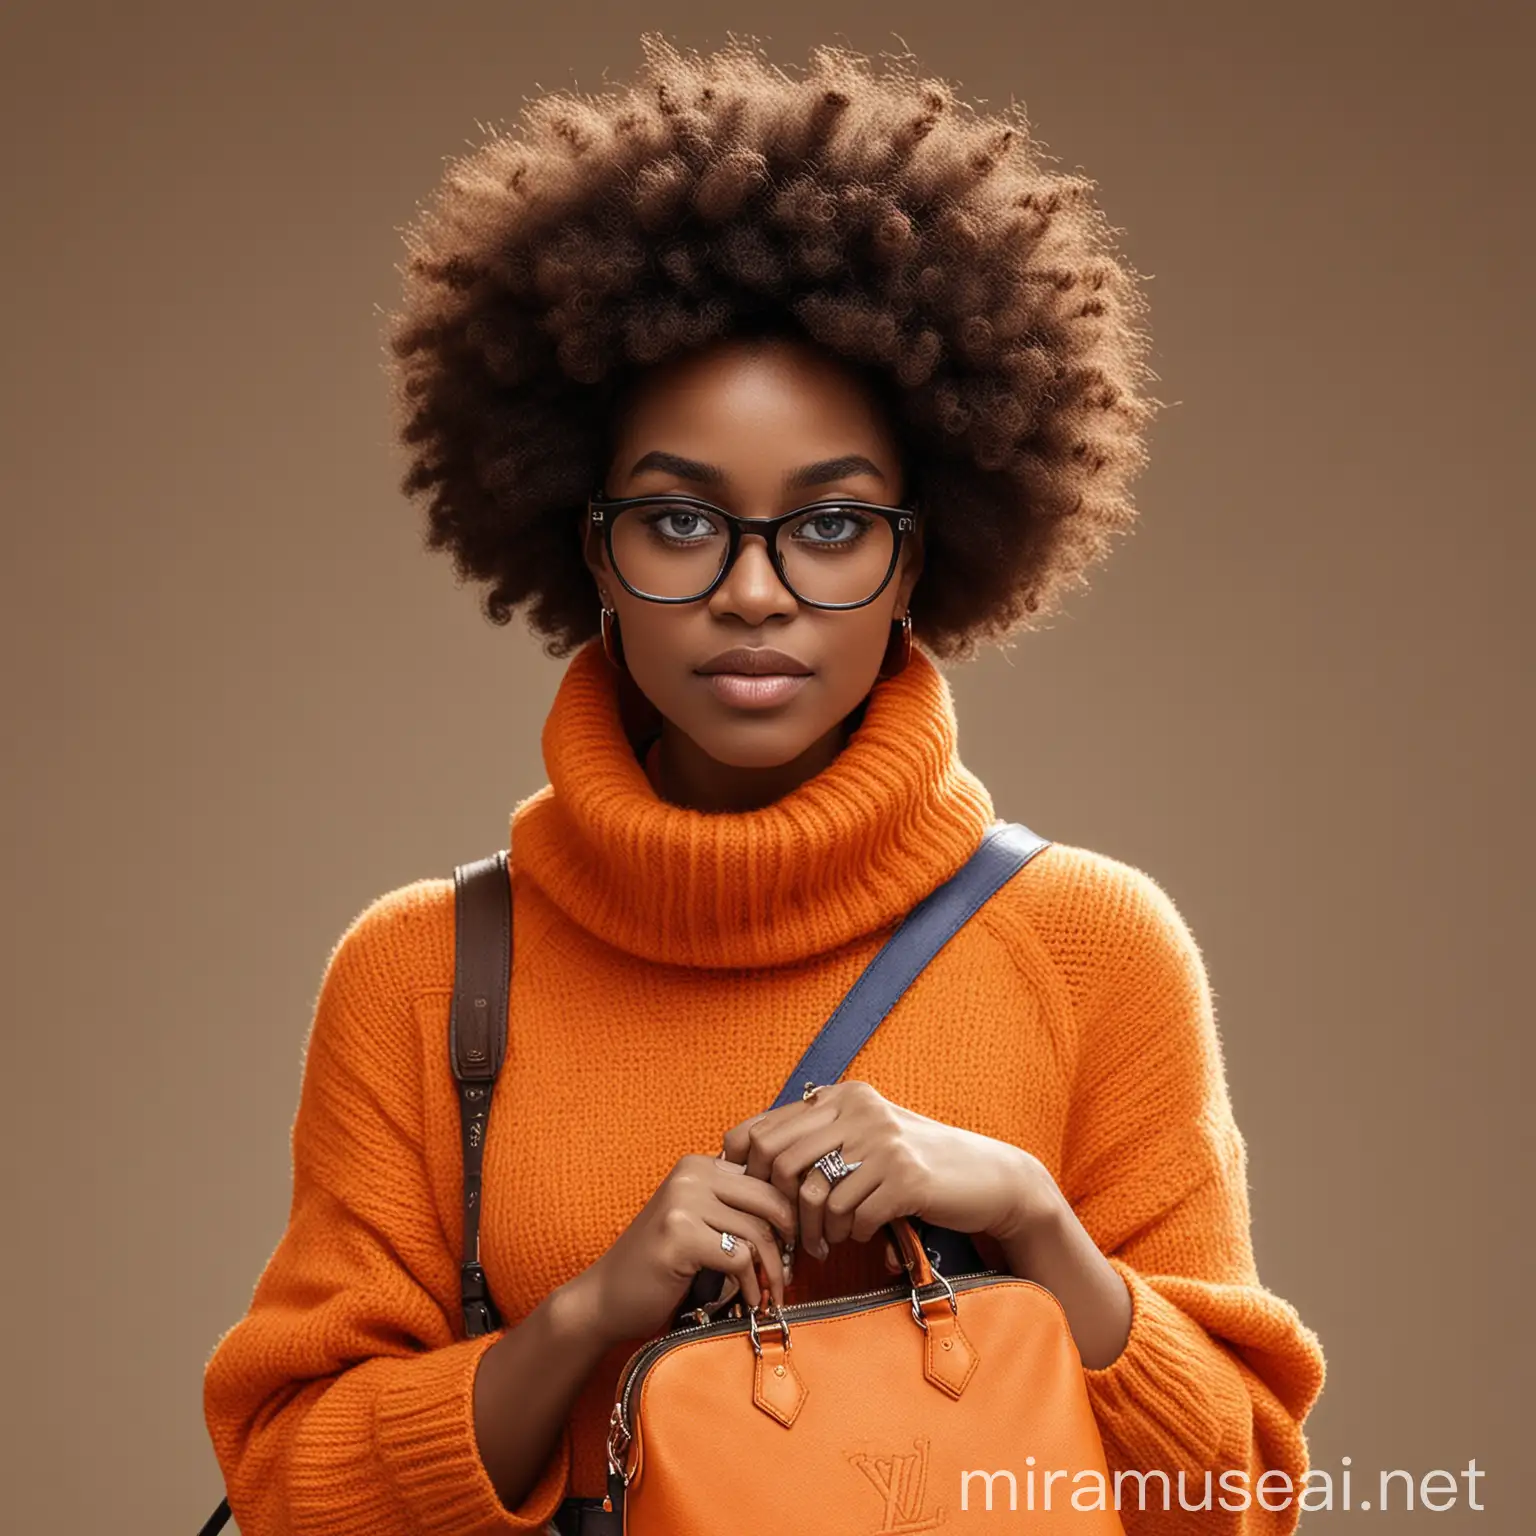 one black woman with dark skin and glasses wearing an orange knit swater with cowel neck and no sleeves holding a louis vitton messenger bag. she has a large afro and blue eyeglasses. she is professional and ready to work
